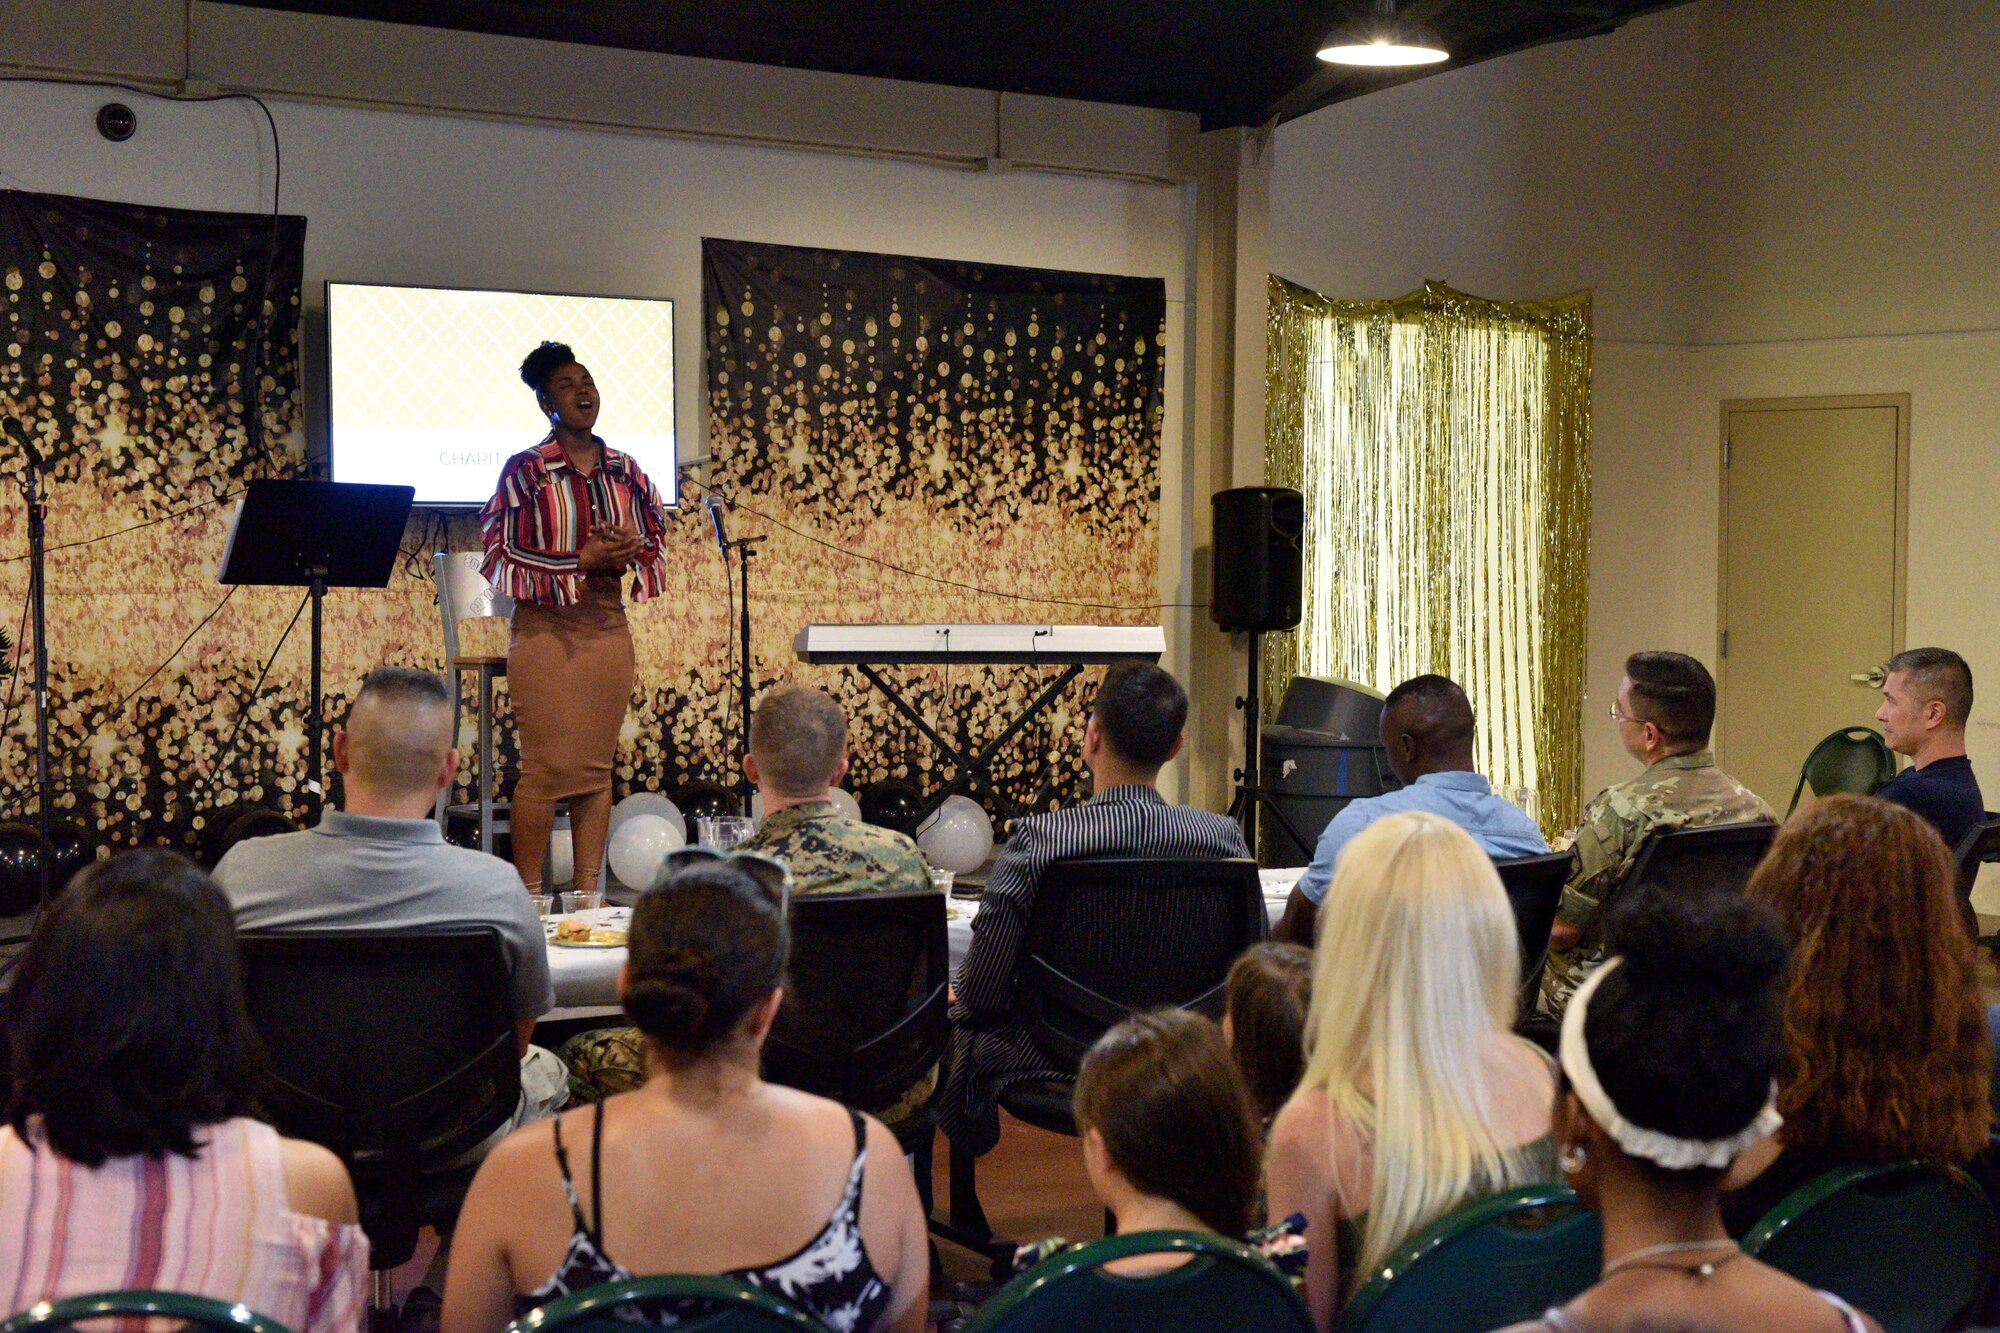 U.S. Army Pfc. Charity Mack, 344th Military Intelligence Battalion student, sings during the semi-annual Goodfellow’s Got Talent show at the Crossroads Student Ministry Center on Goodfellow Air Force Base, Texas, July 13, 2018. The participants showcased a variety of talents, including, magic tricks, singing, guitar, piano and poetry. (U.S. Air Force photo by Senior Airman Randall Moose/Released)